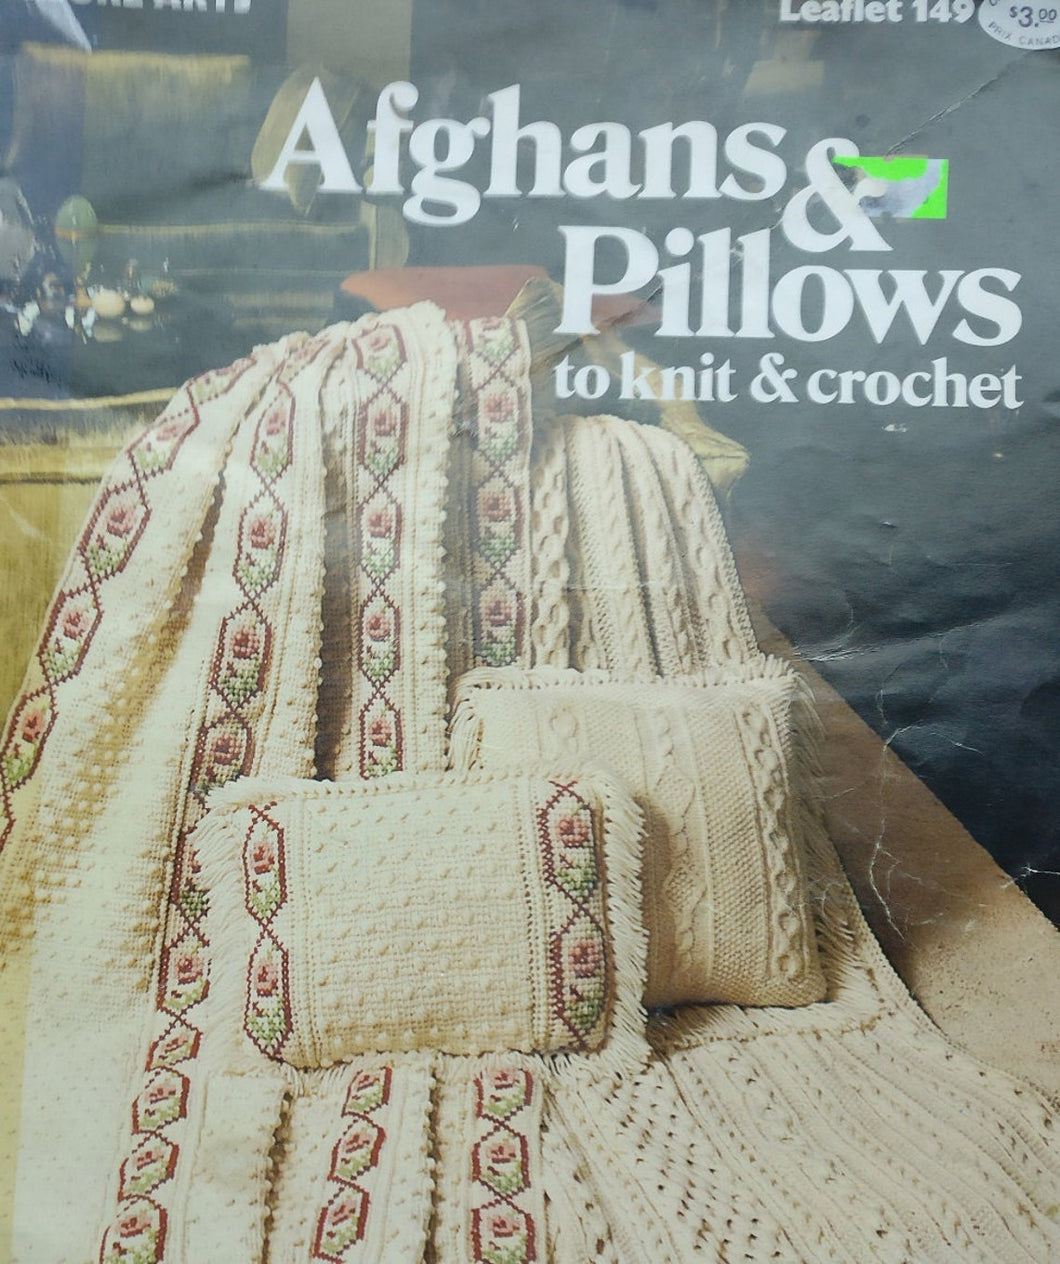 Afghans and Pillows  Leaflet 149